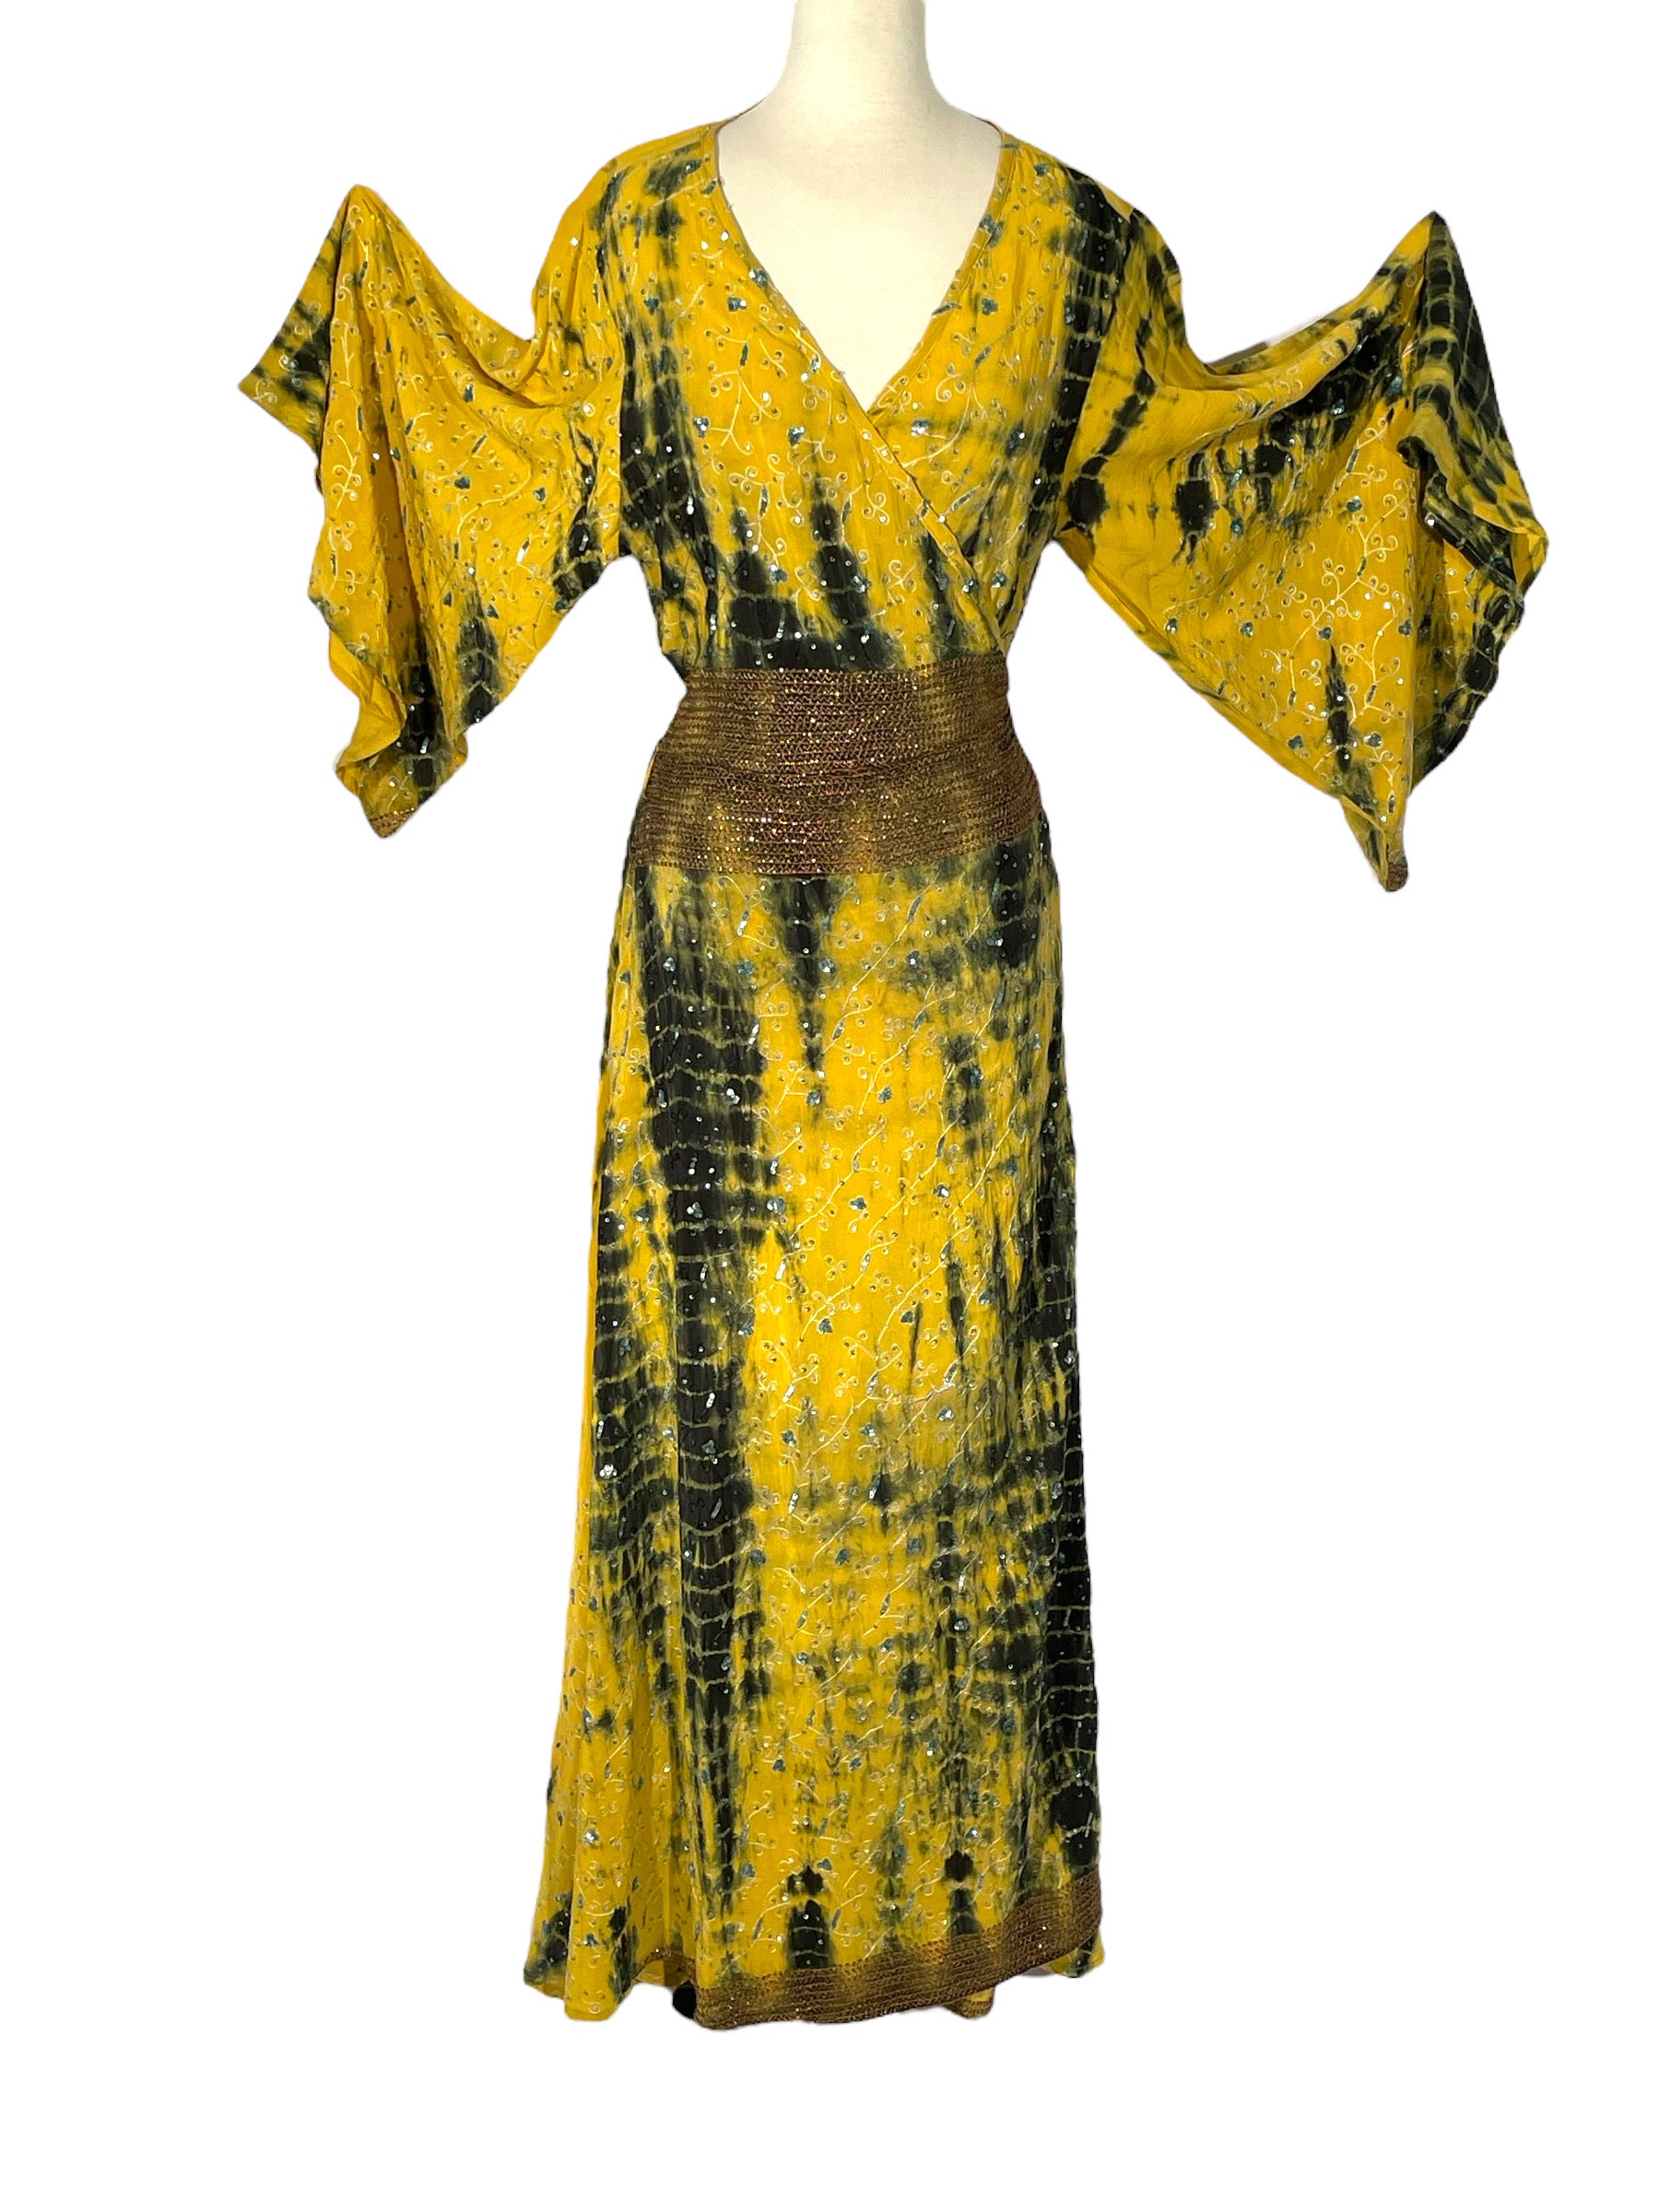 DDW-114 Yellow Dip-Dyed Wrap Med/Large